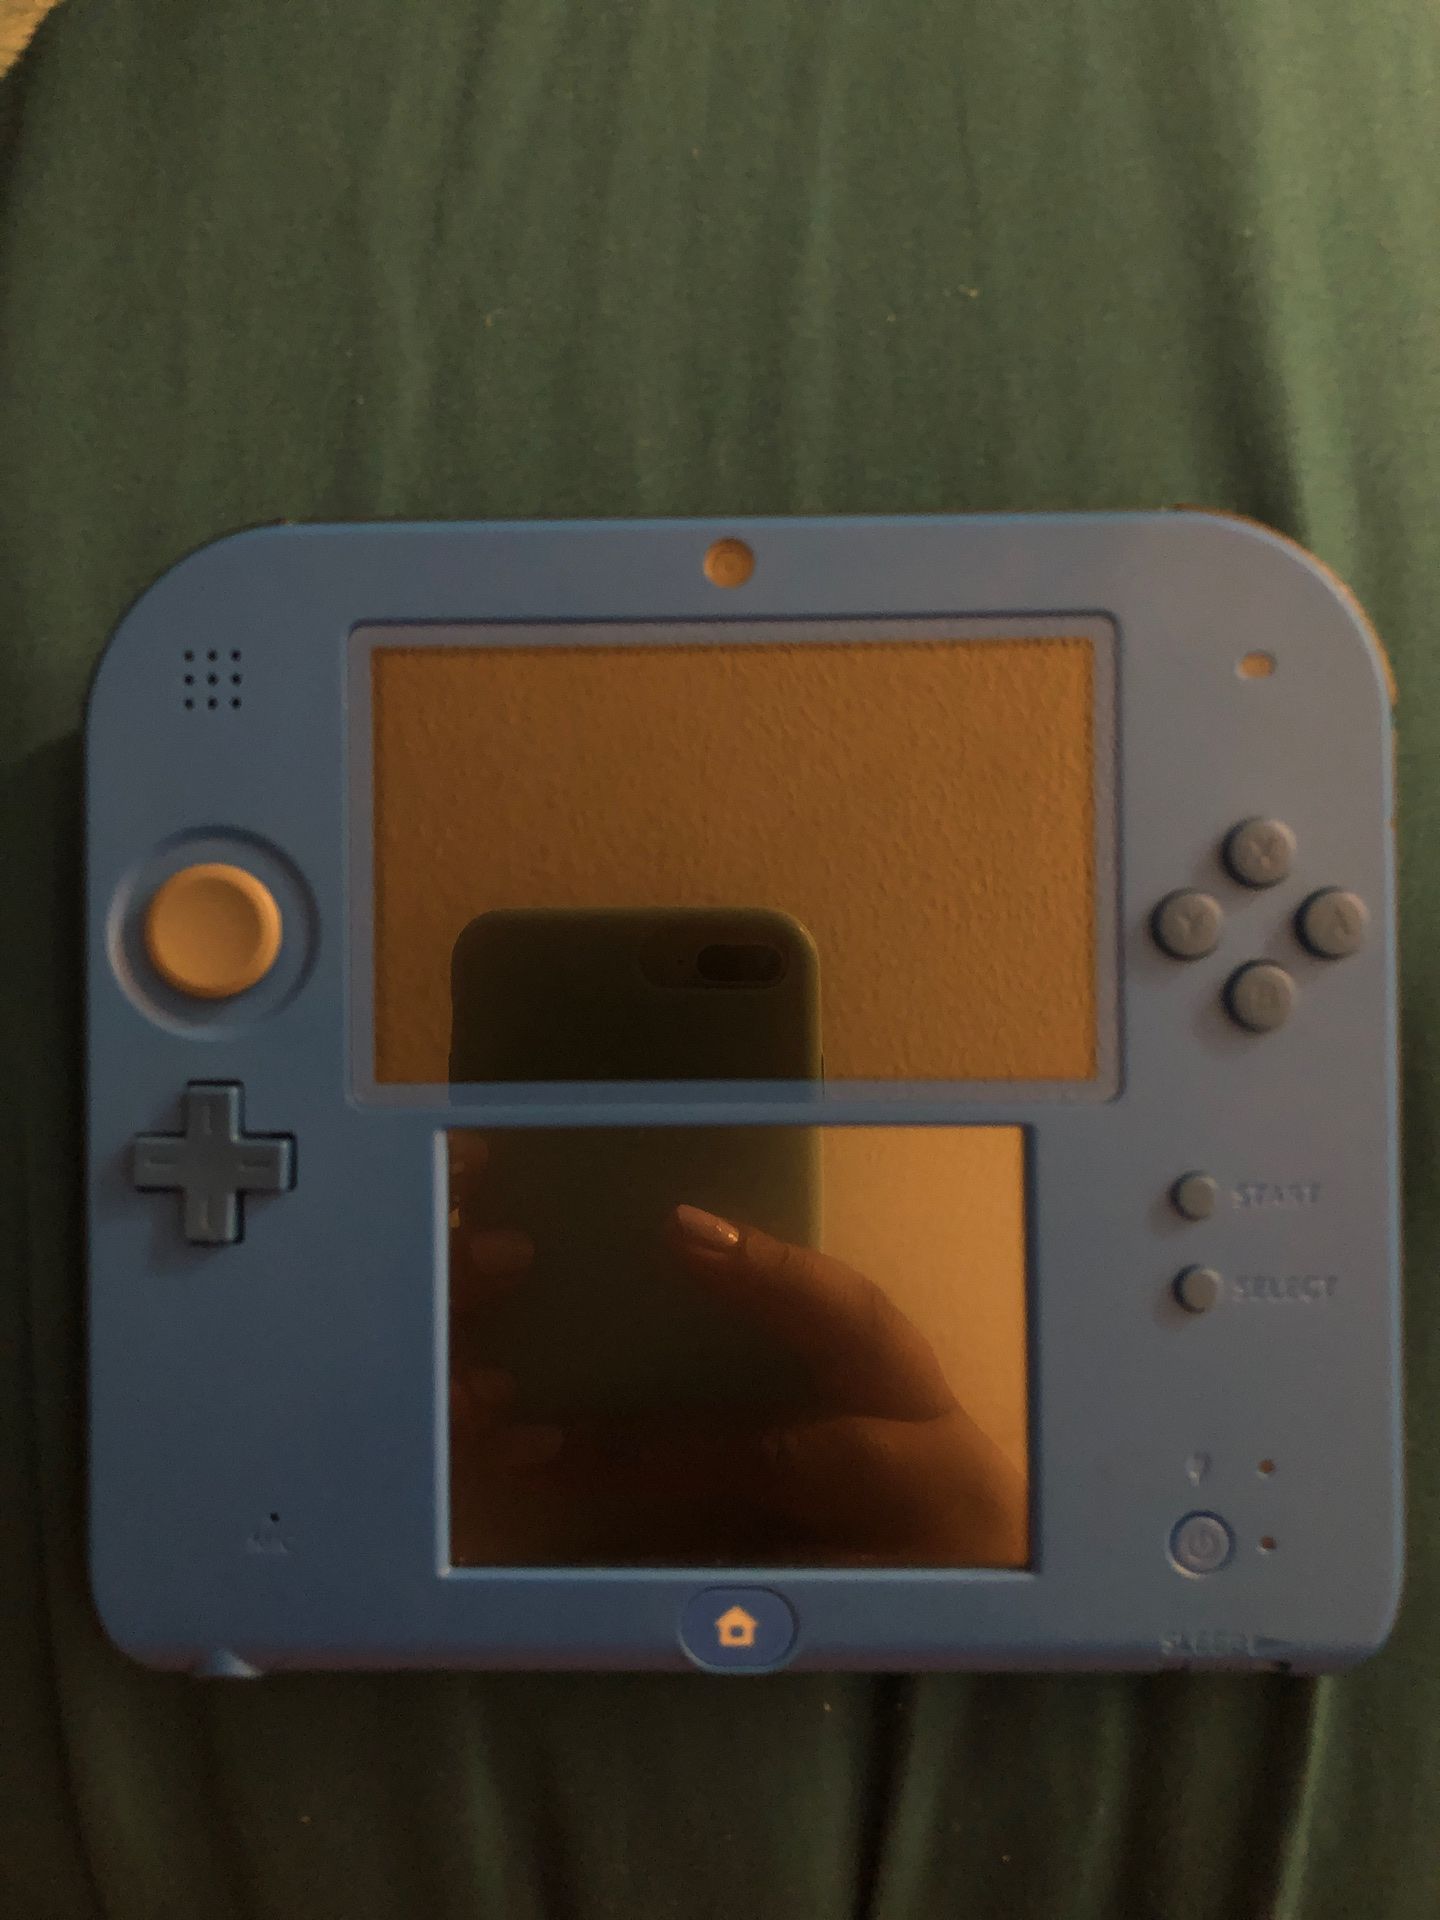 Nintendo 2DS comes with already super Mario built in